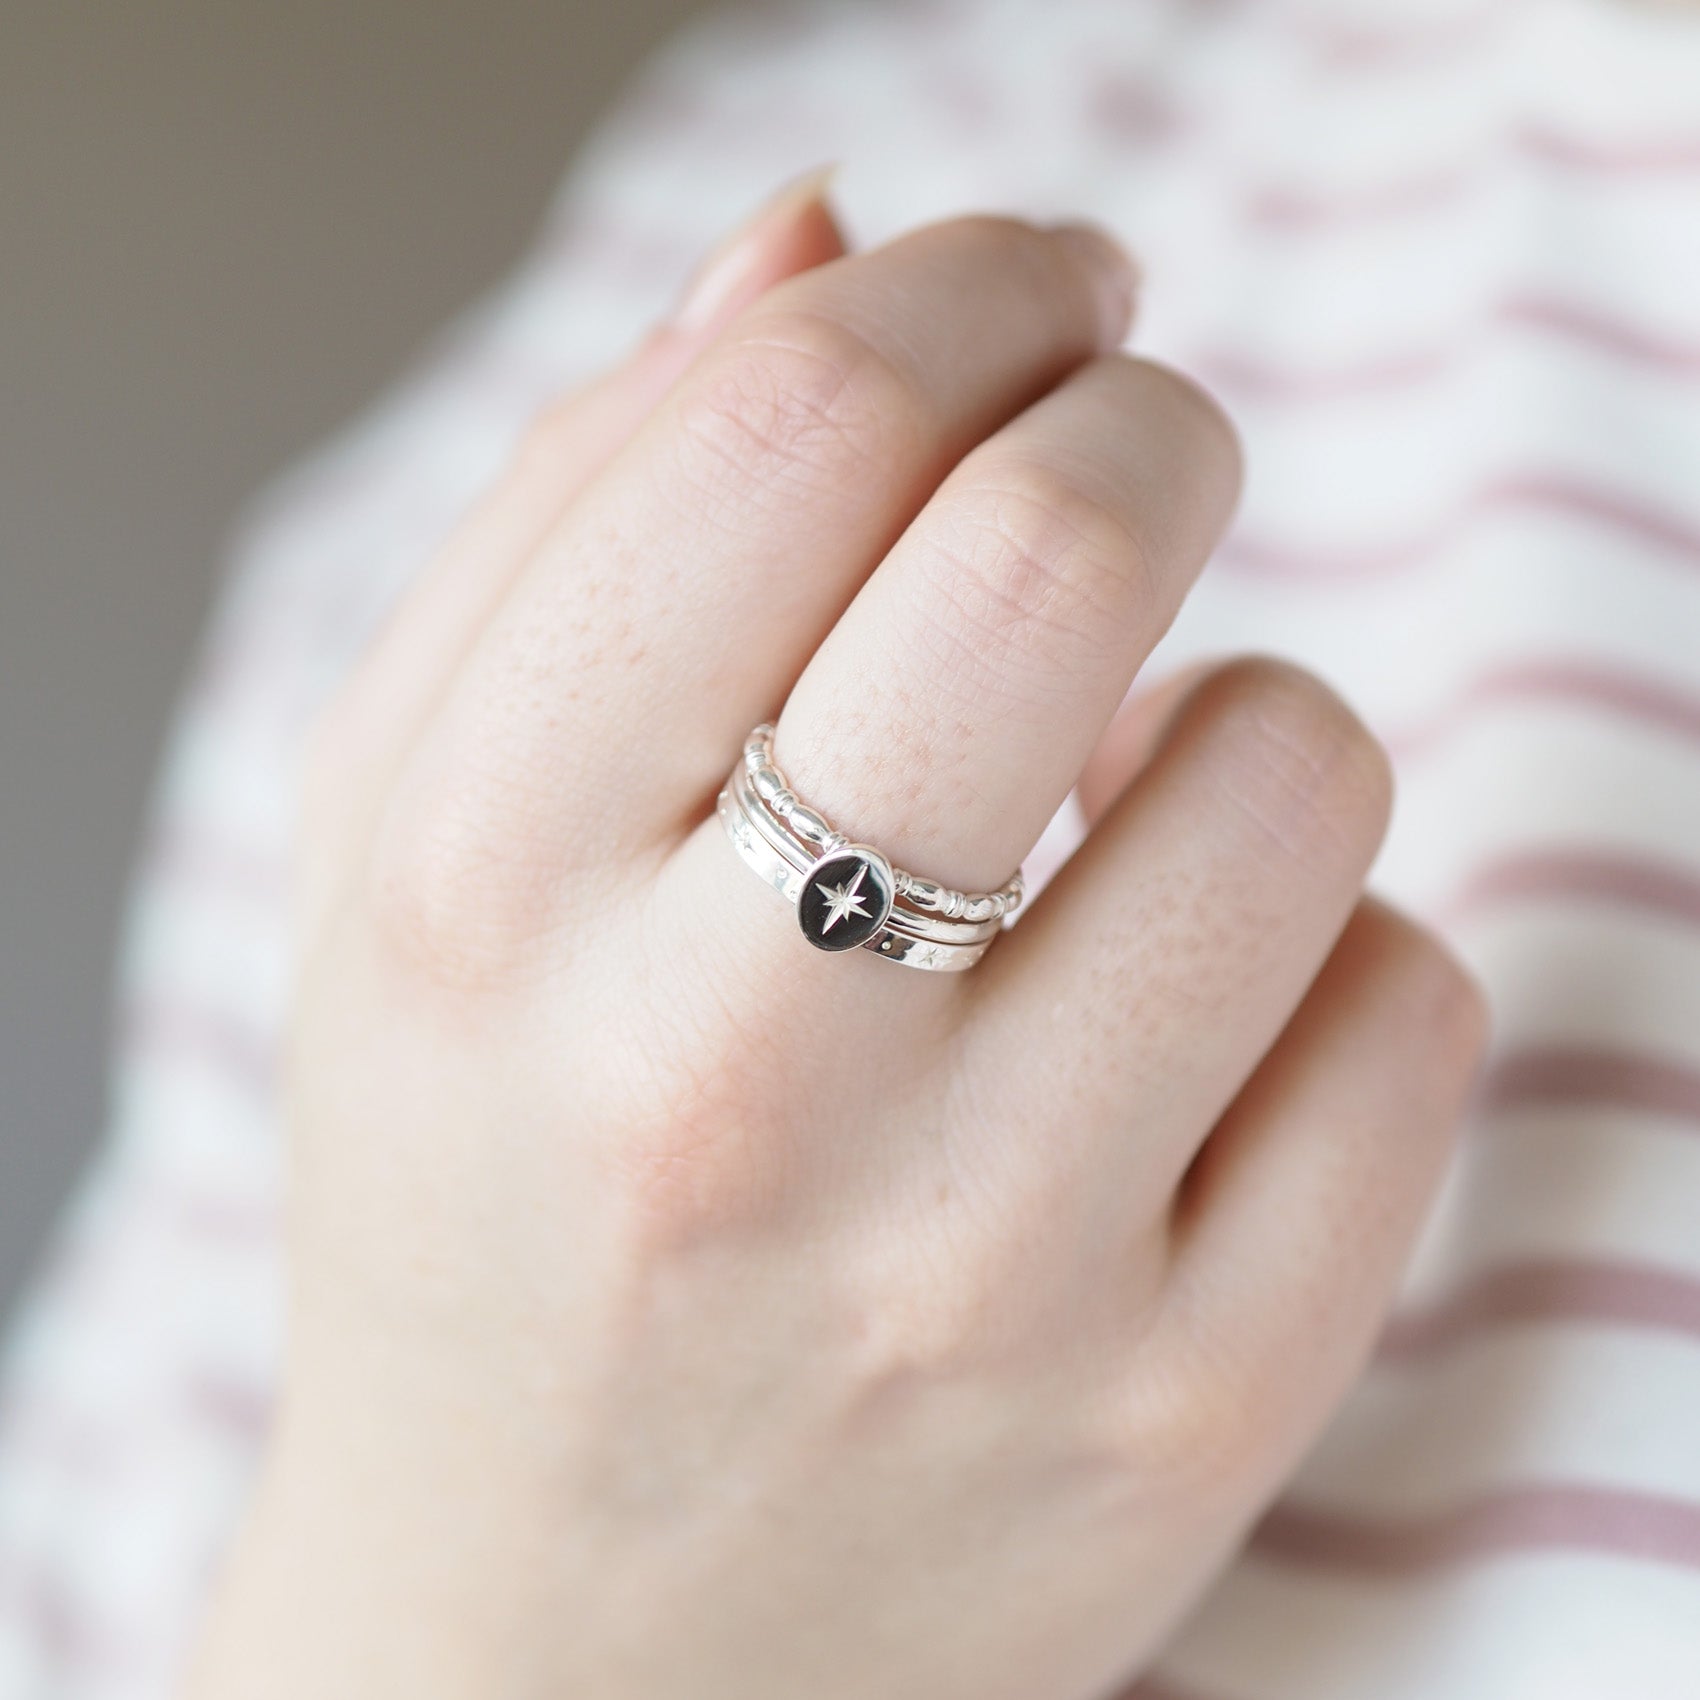 Starry Stacking Ring Set in Sterling Silver